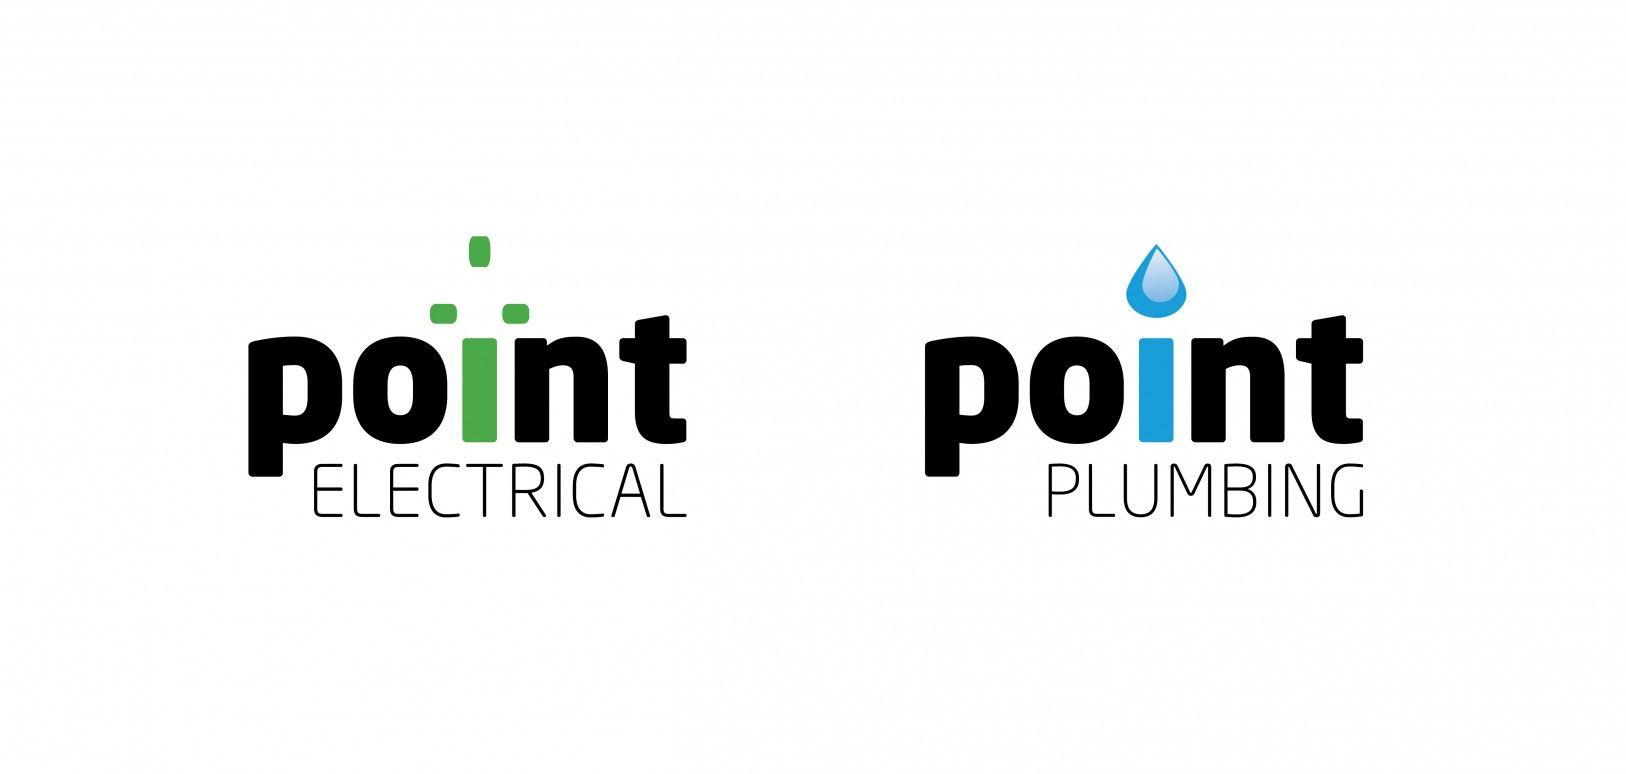 Point Logo - Point electrical and plumbing logos - Braes Design